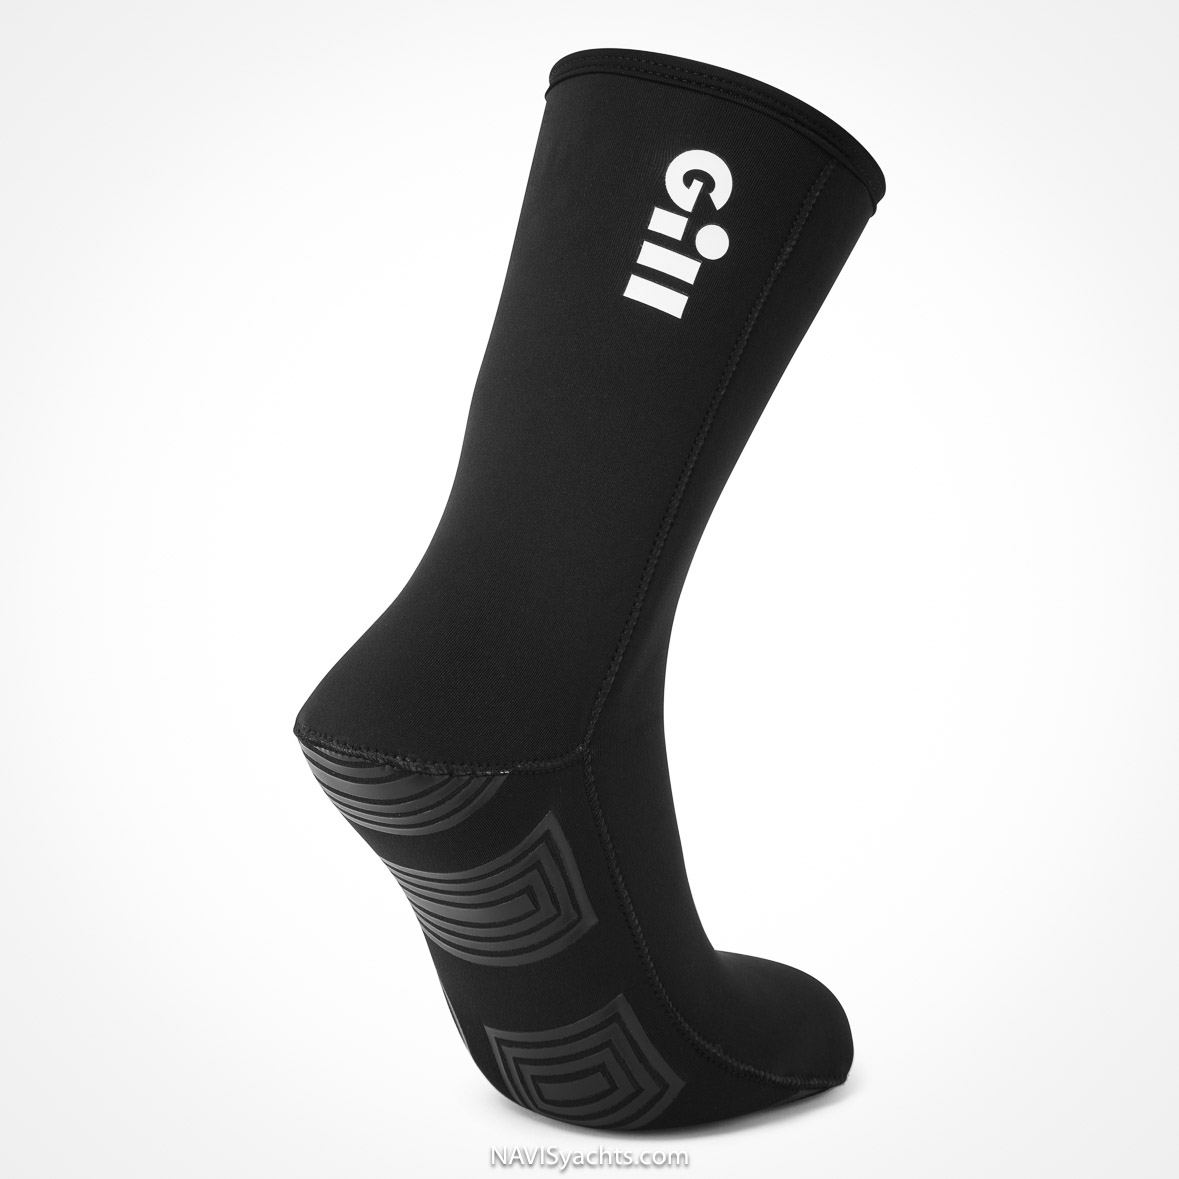 Gill’s Thermal Hot Socks are a versatile addition to any water sports enthusiast’s gear